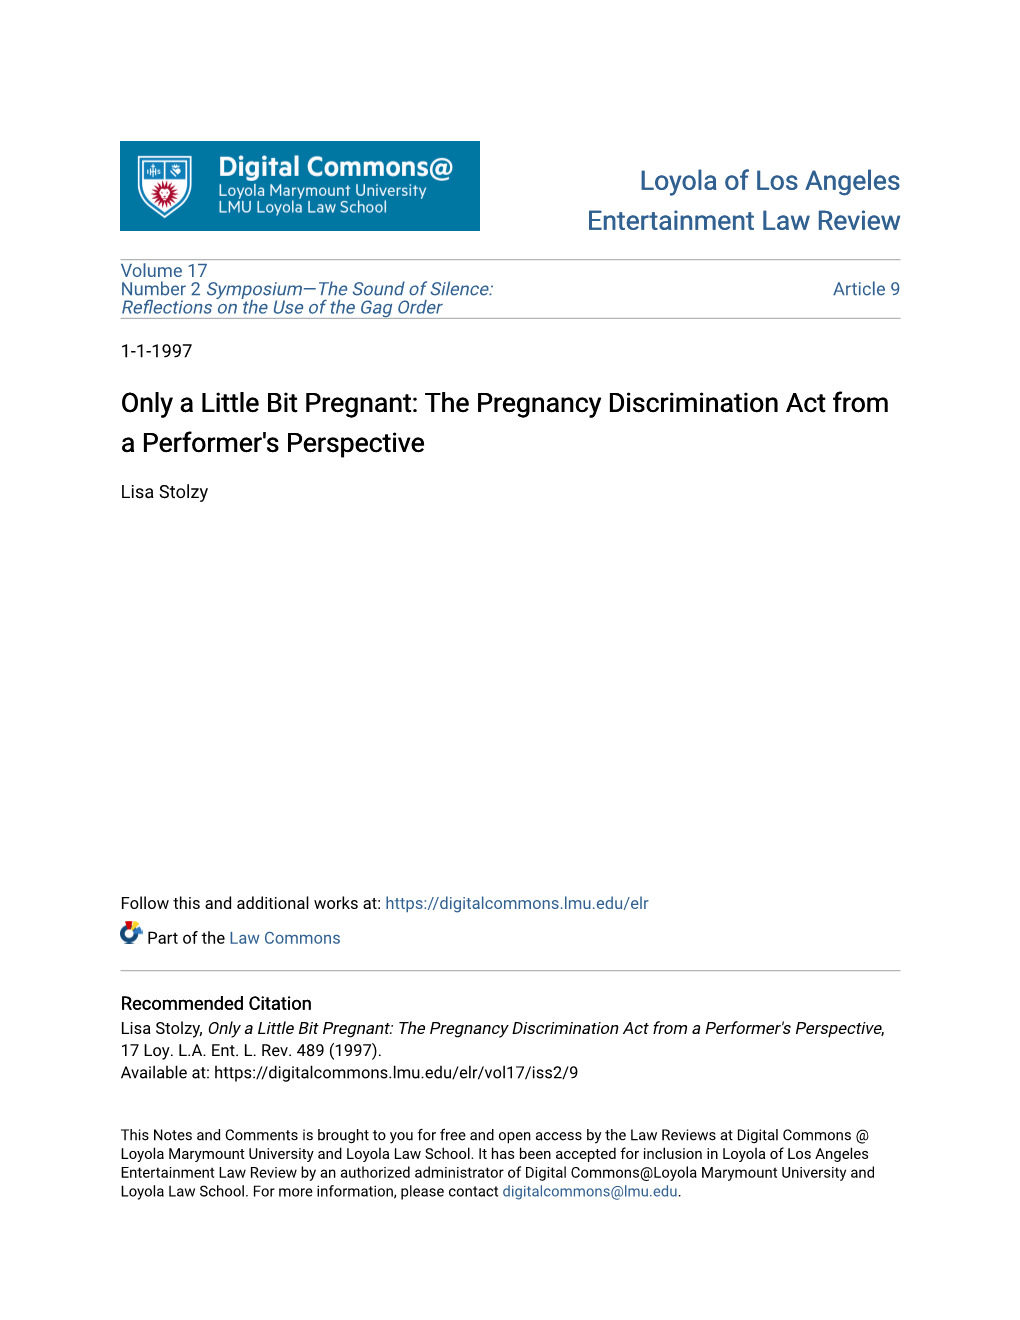 The Pregnancy Discrimination Act from a Performer's Perspective